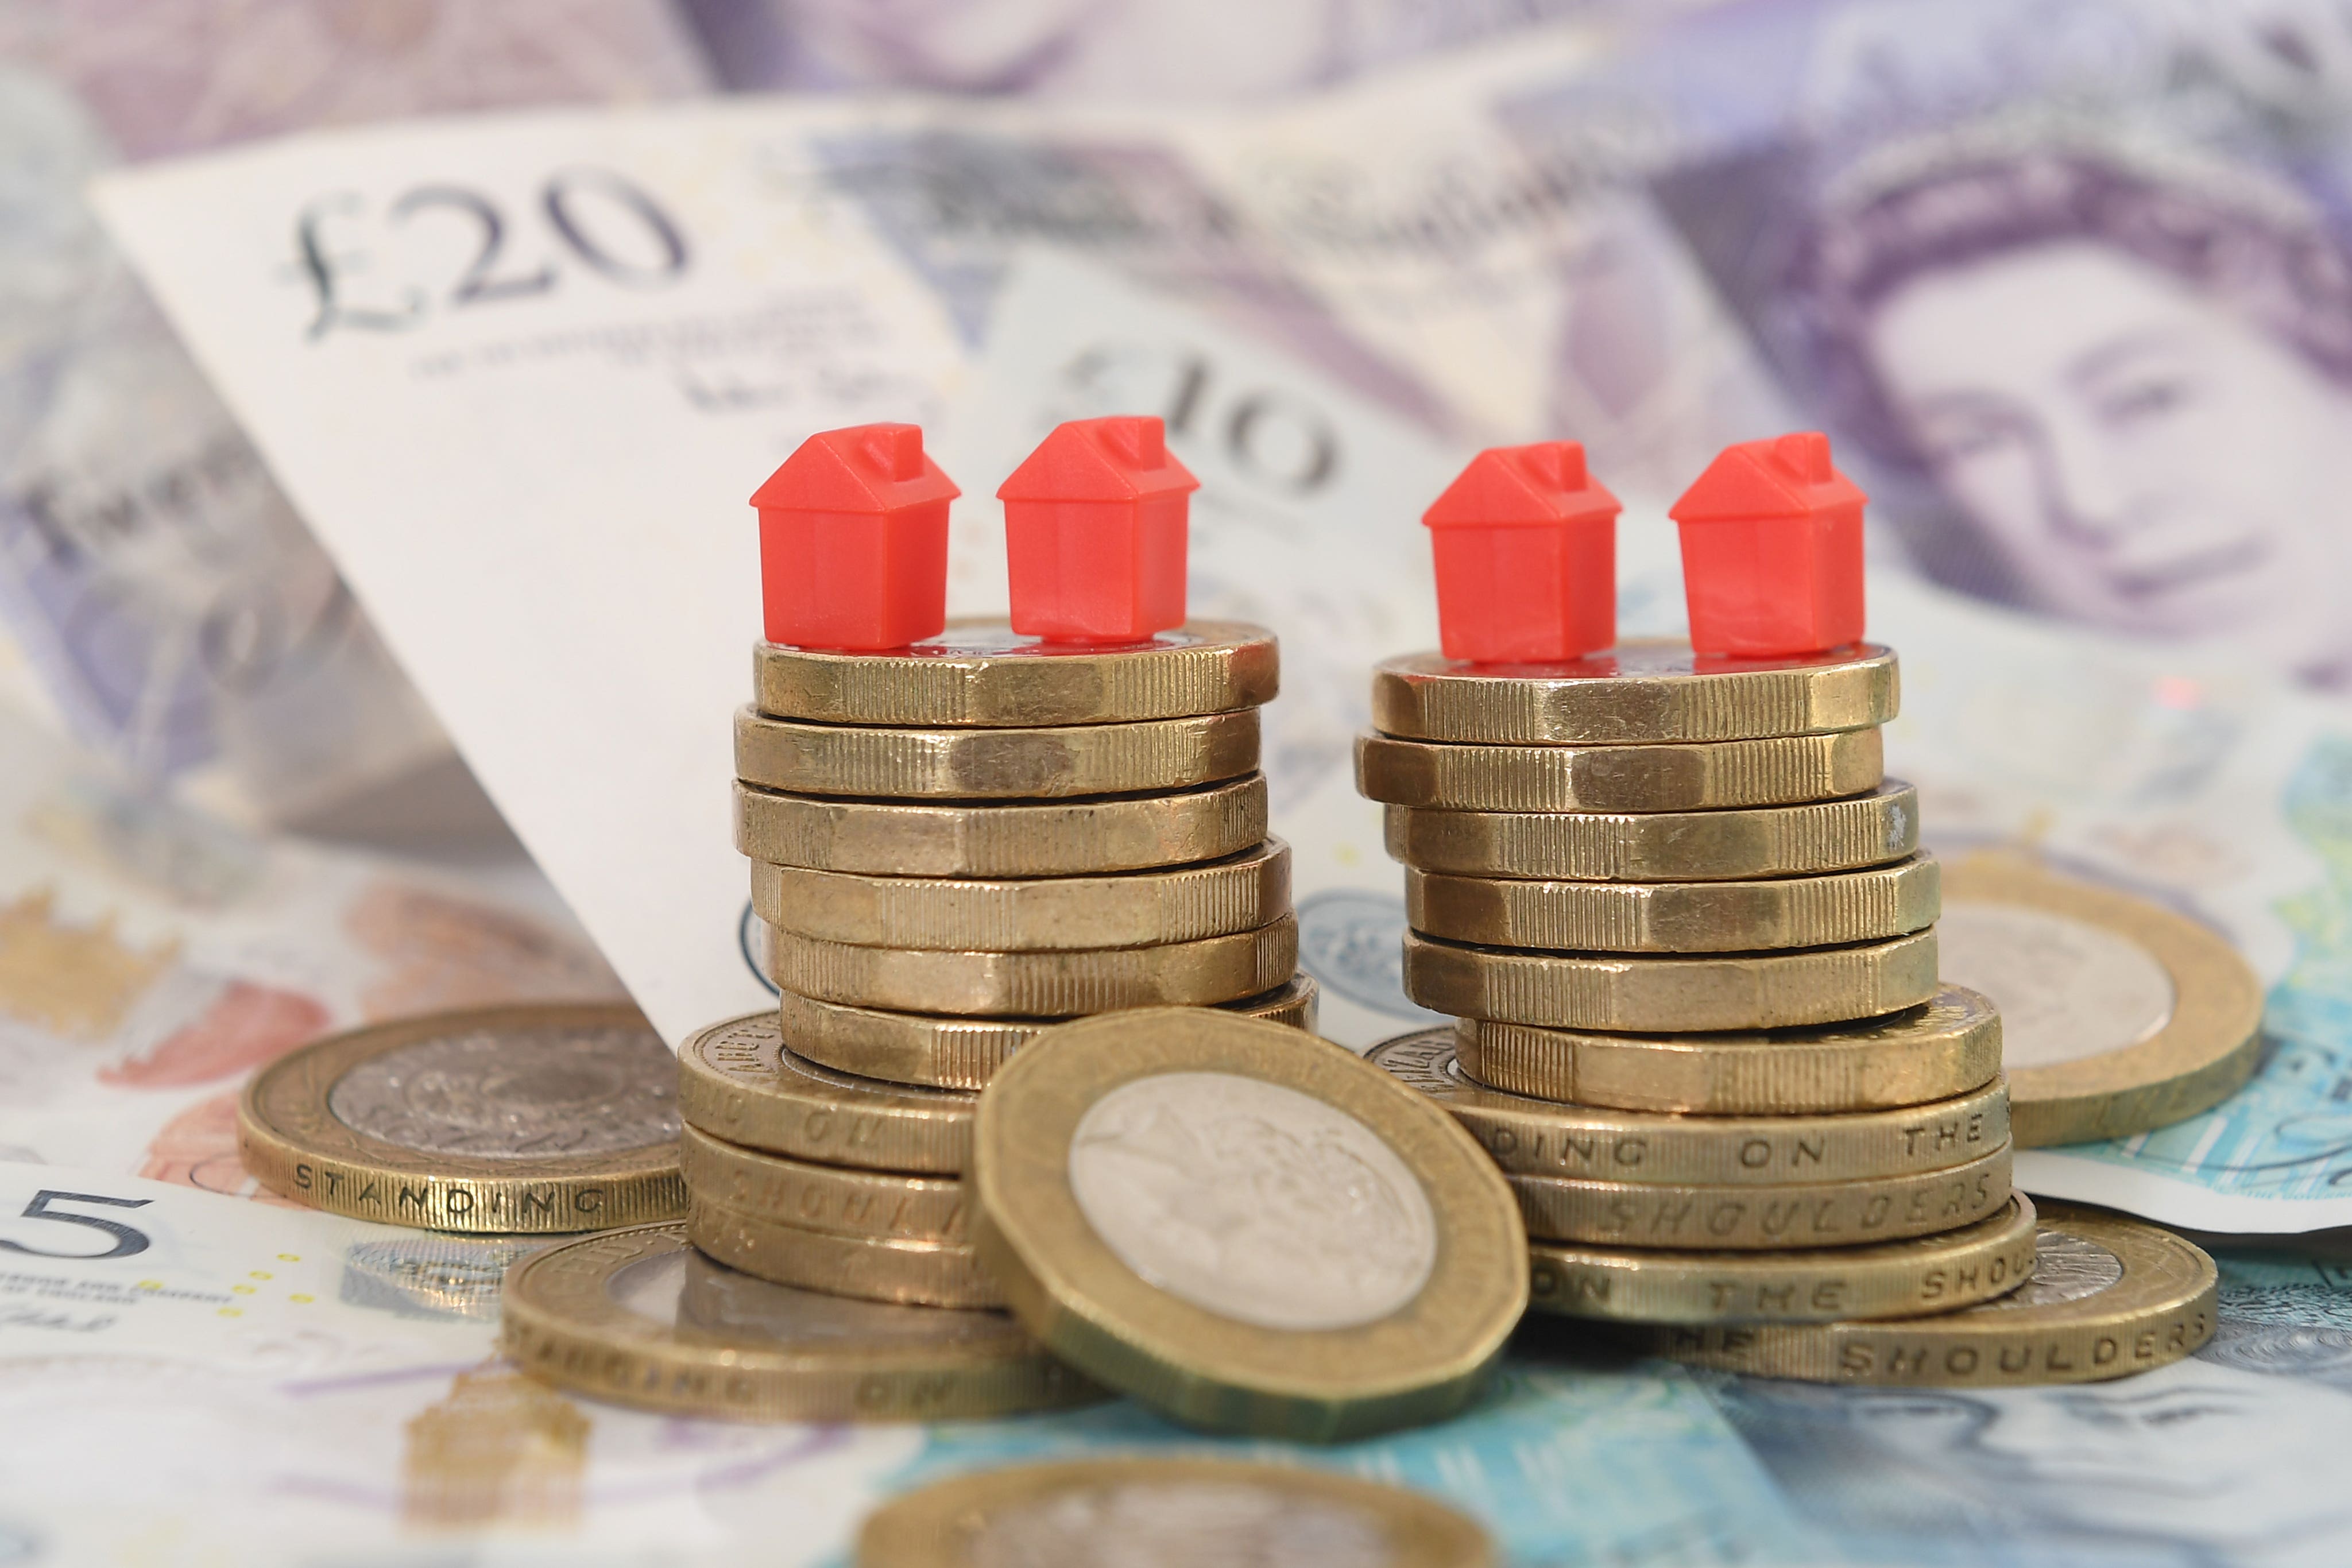 House prices are dropping but mortgages are on the rise